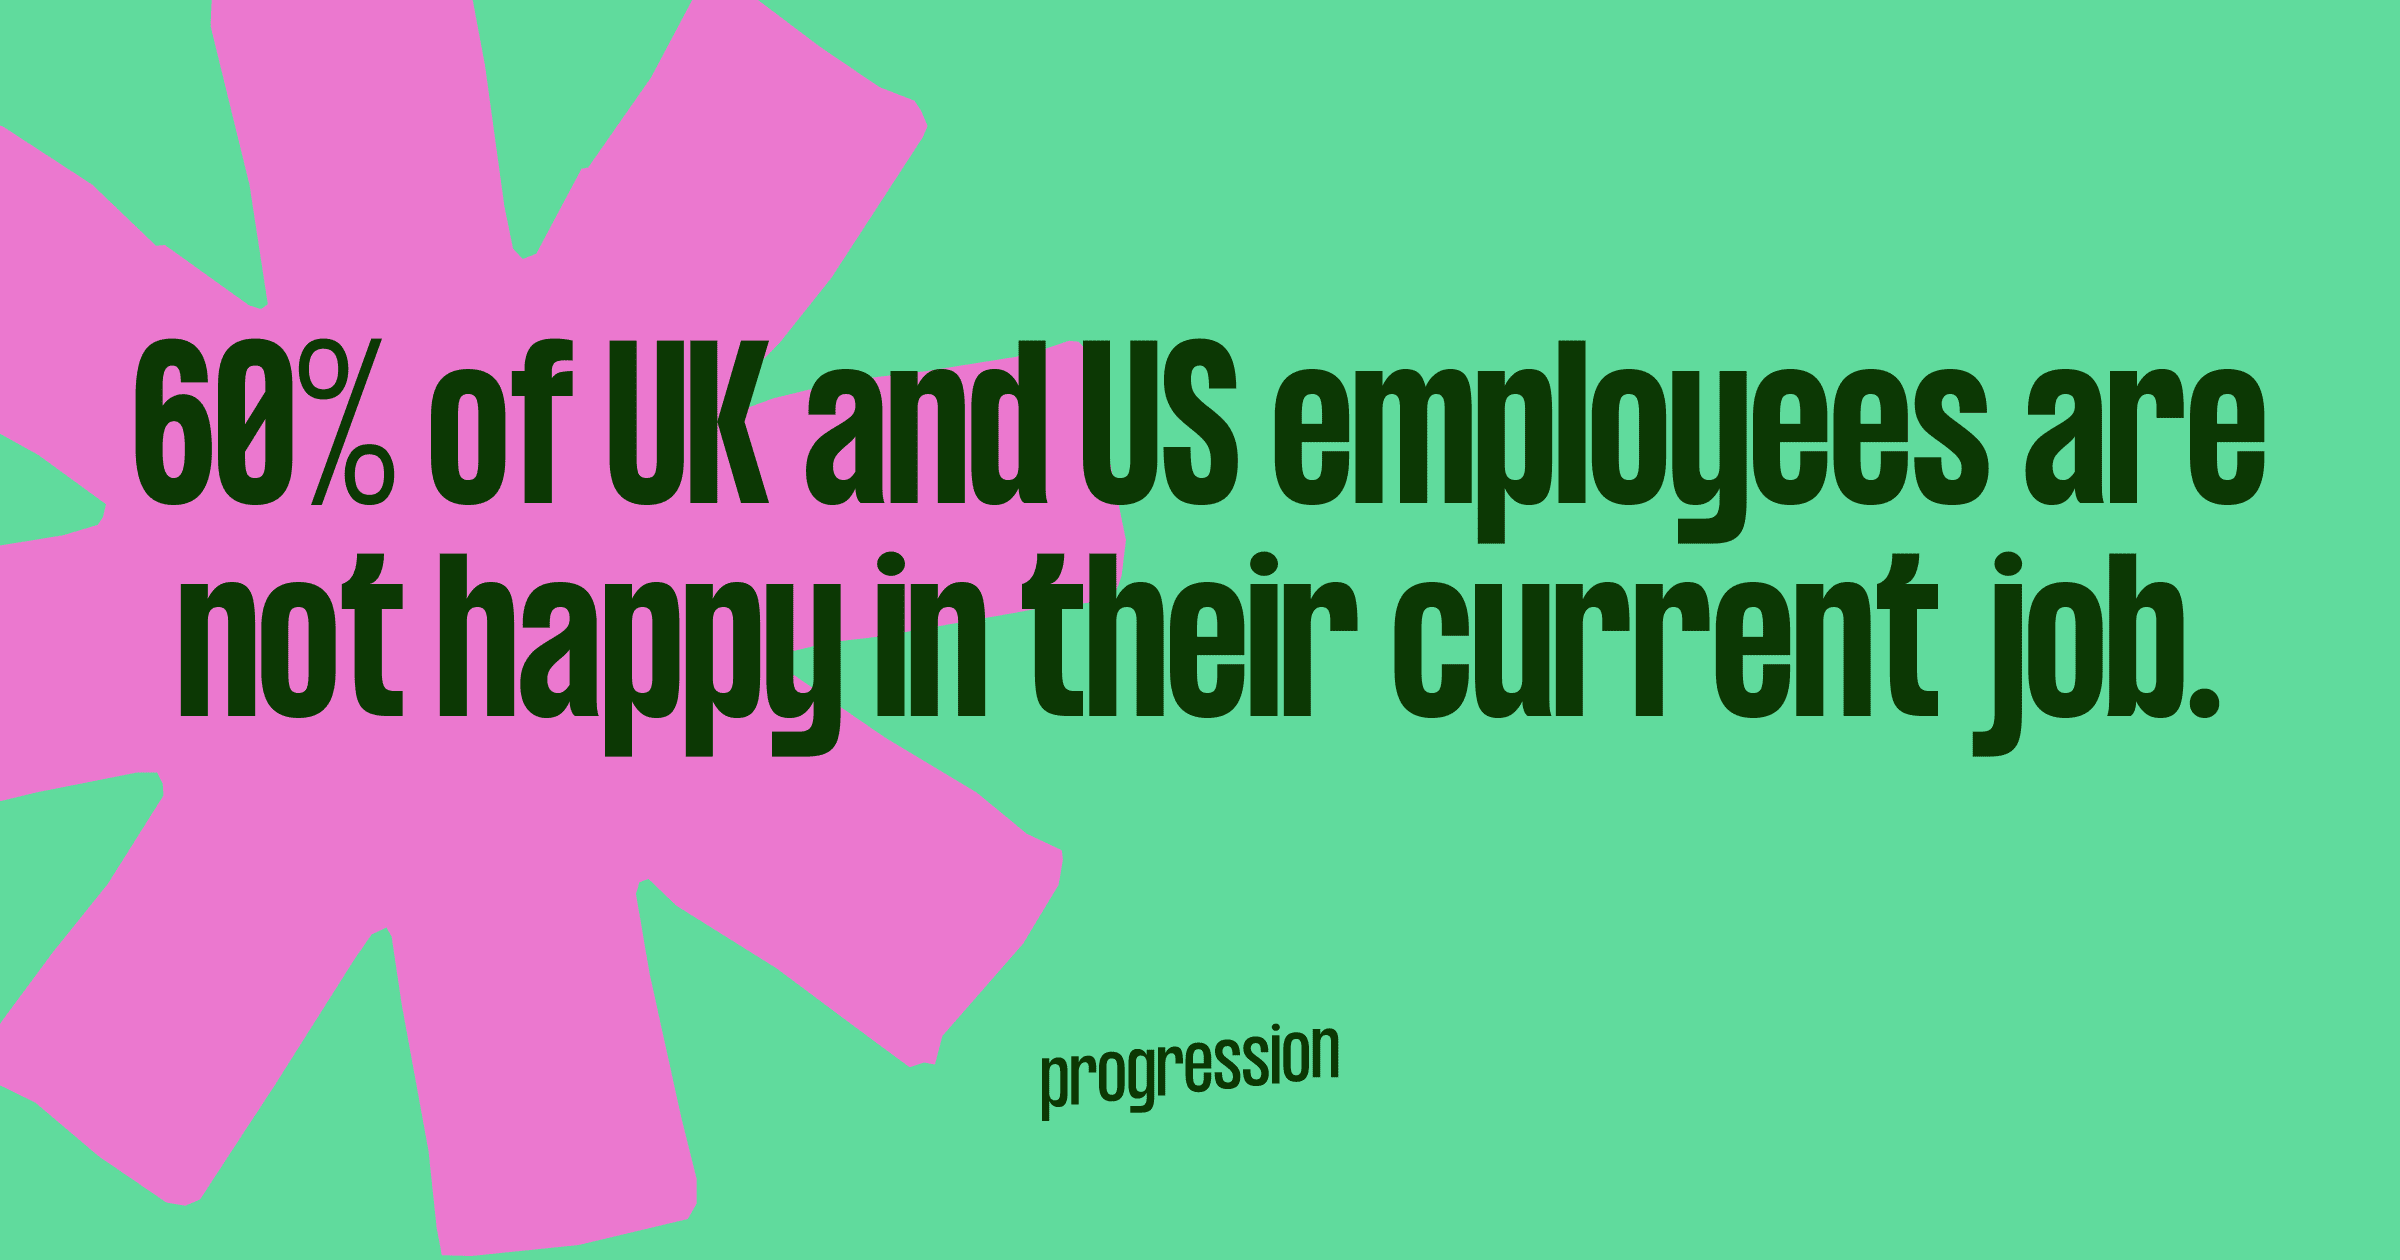 Graphic highlighting how 60% of UK and US employees are unhappy in their current job.